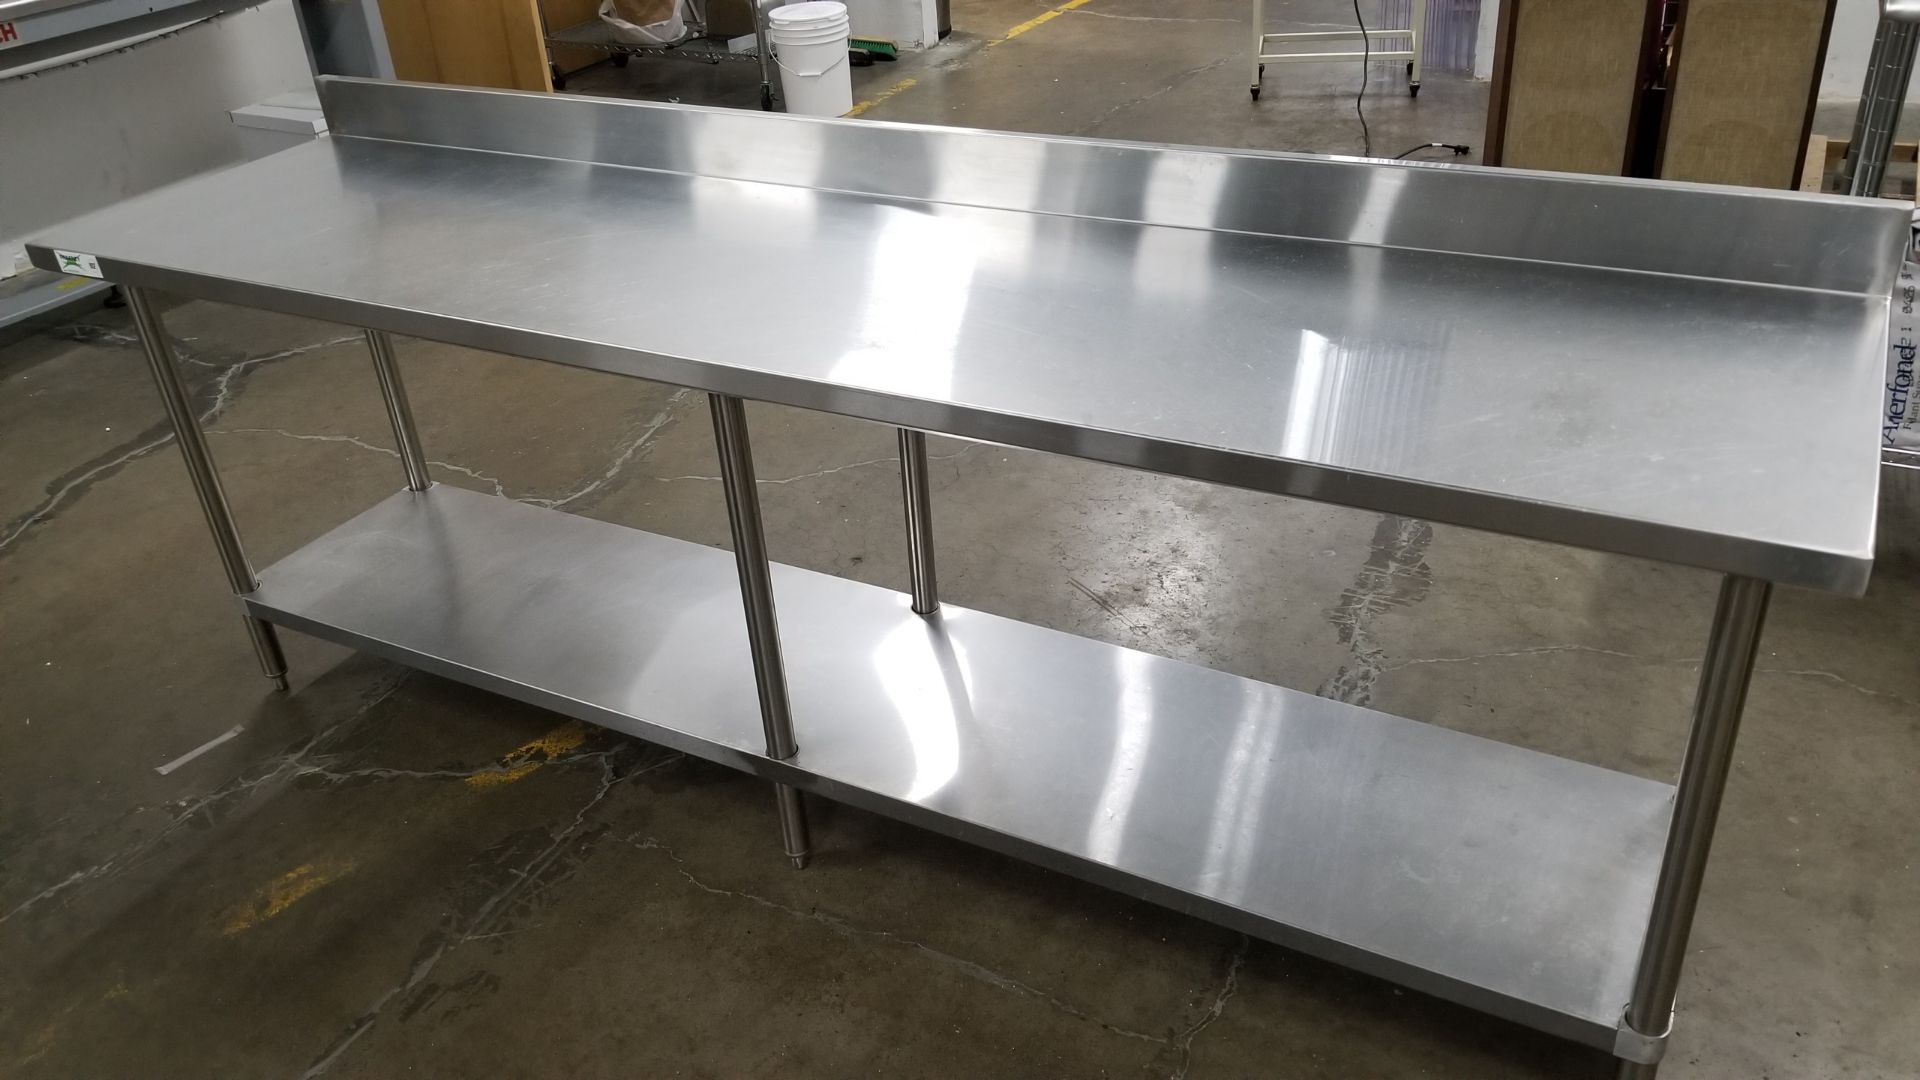 24" x 96" stainless steel table